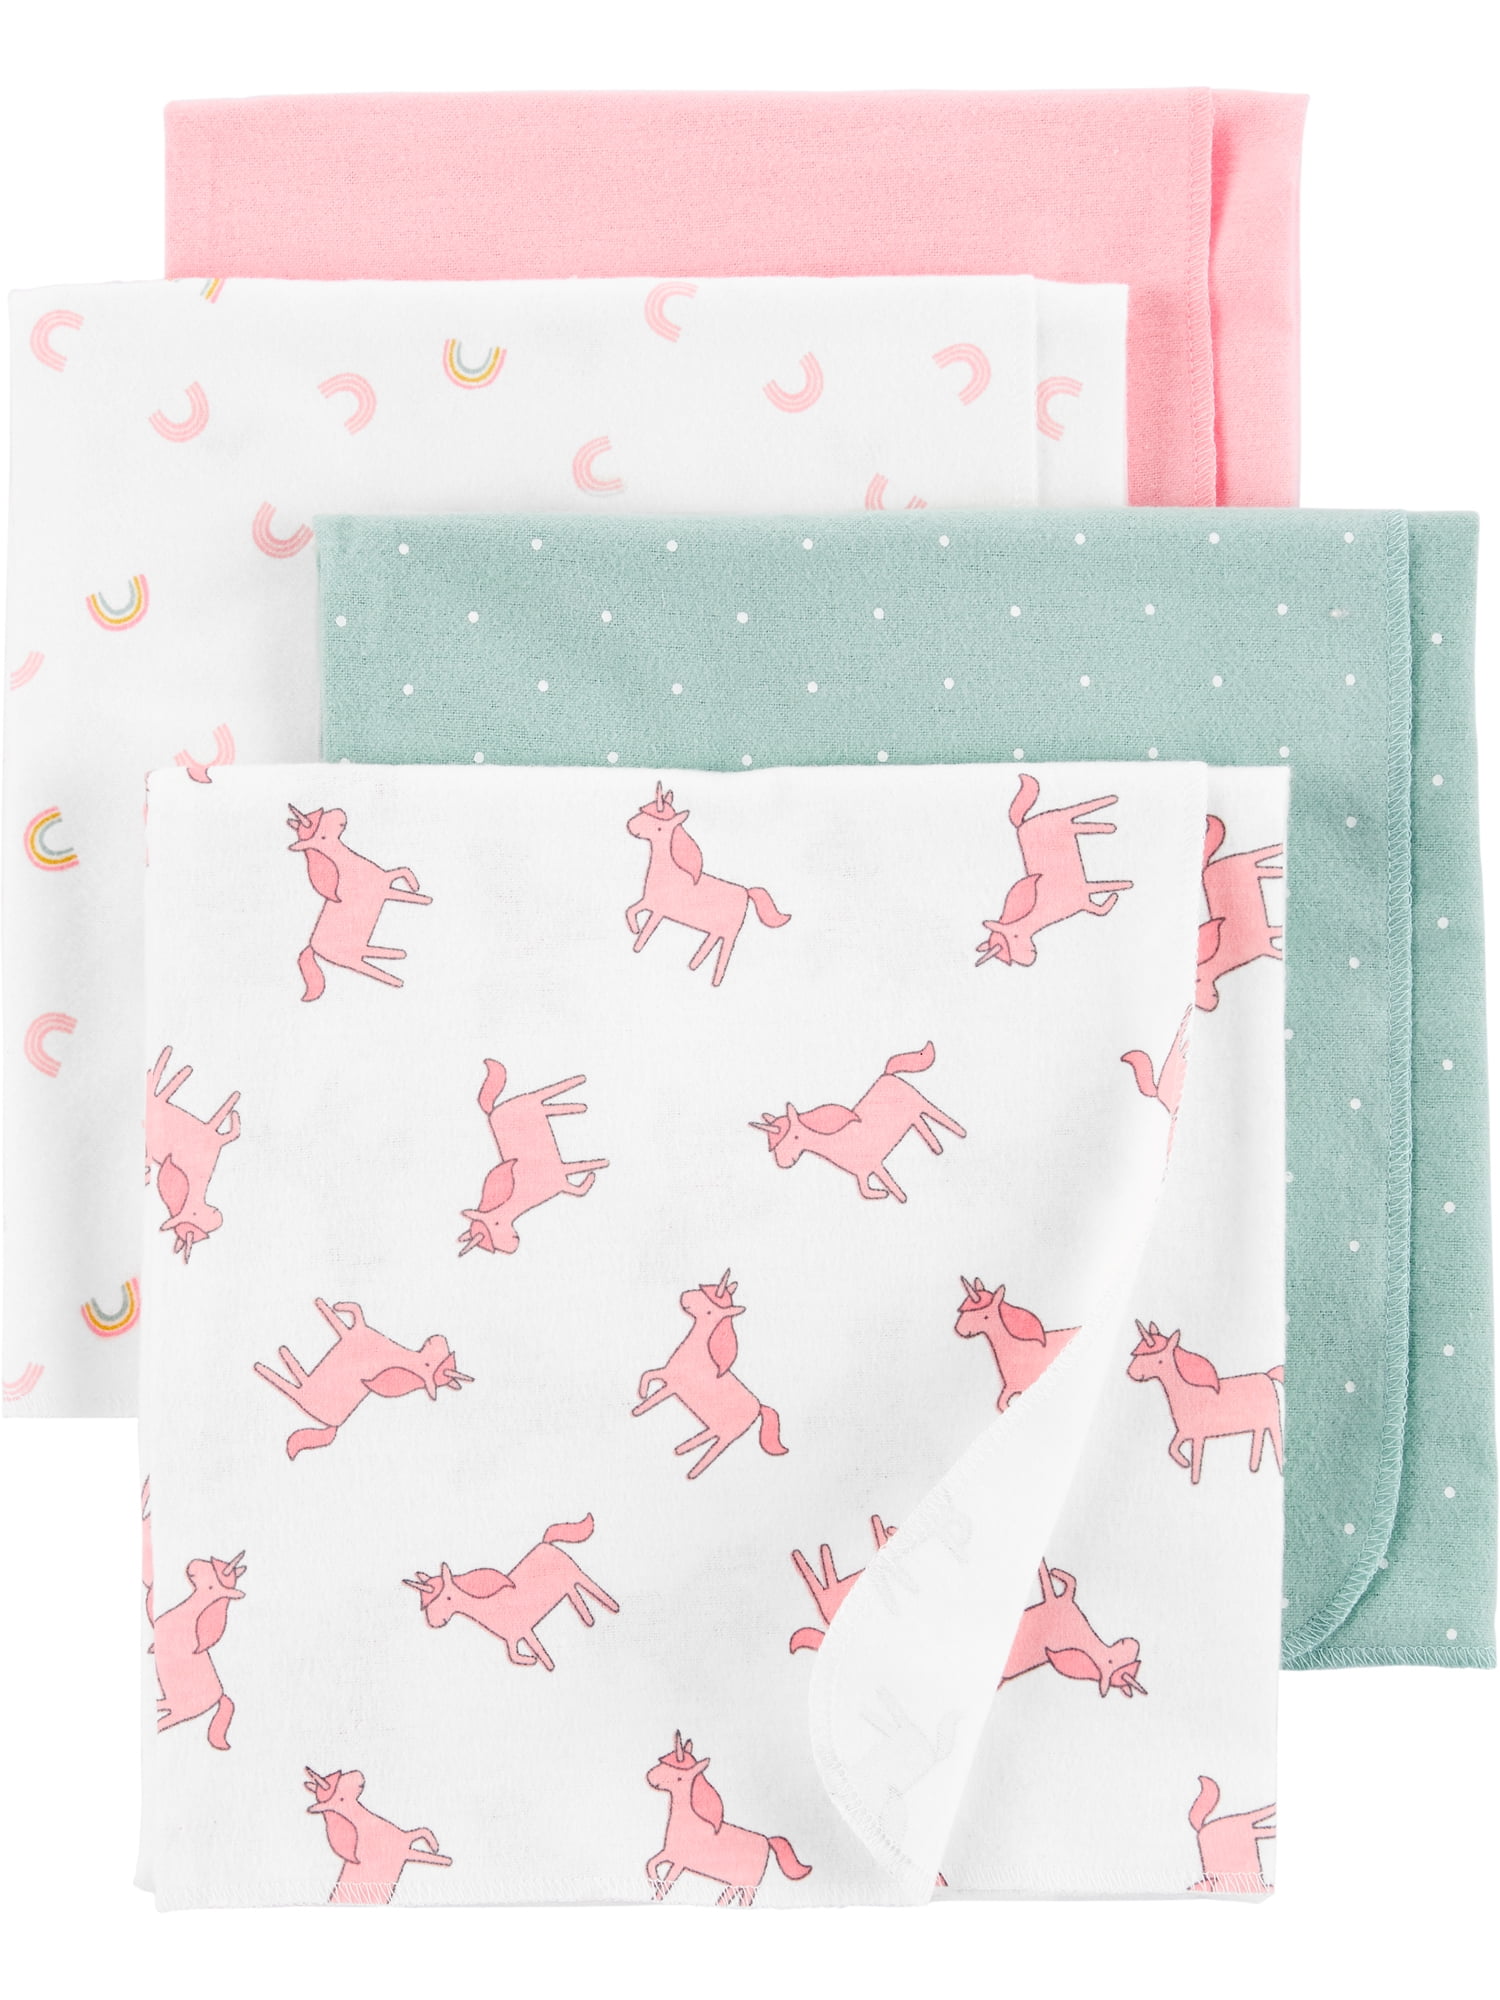 New NWT Carter Girl Unicorn Heart 4 Pack Receiving Flannel Cotton Blanket Set 